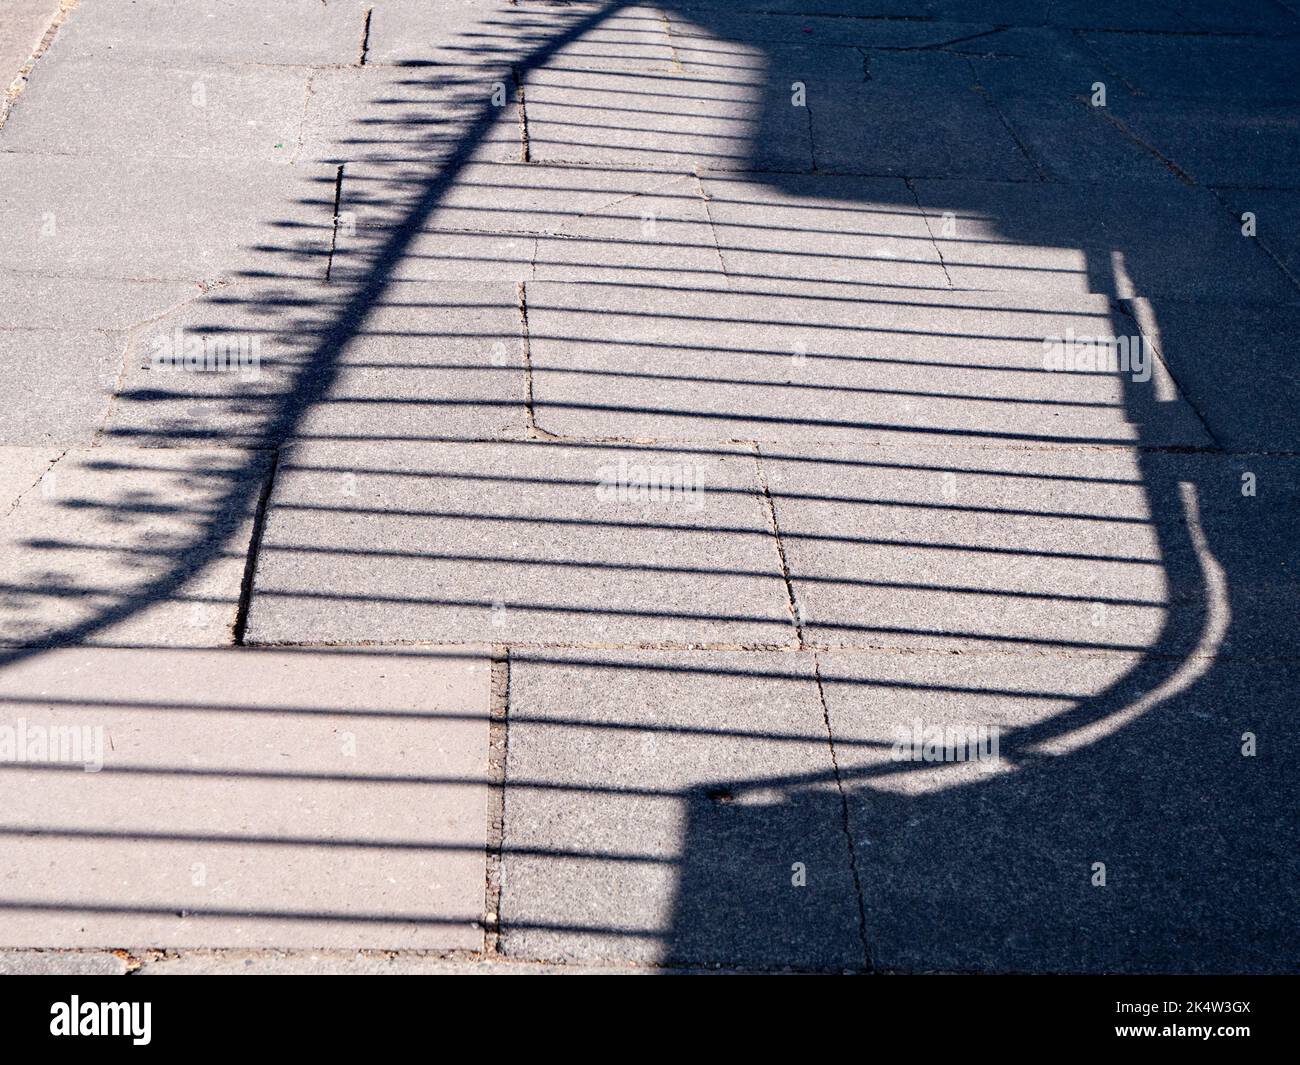 In the right time and place, even the everyday and ordinary can become fascinating. Take this abstract pattern on the pavement, the shadow of a decora Stock Photo